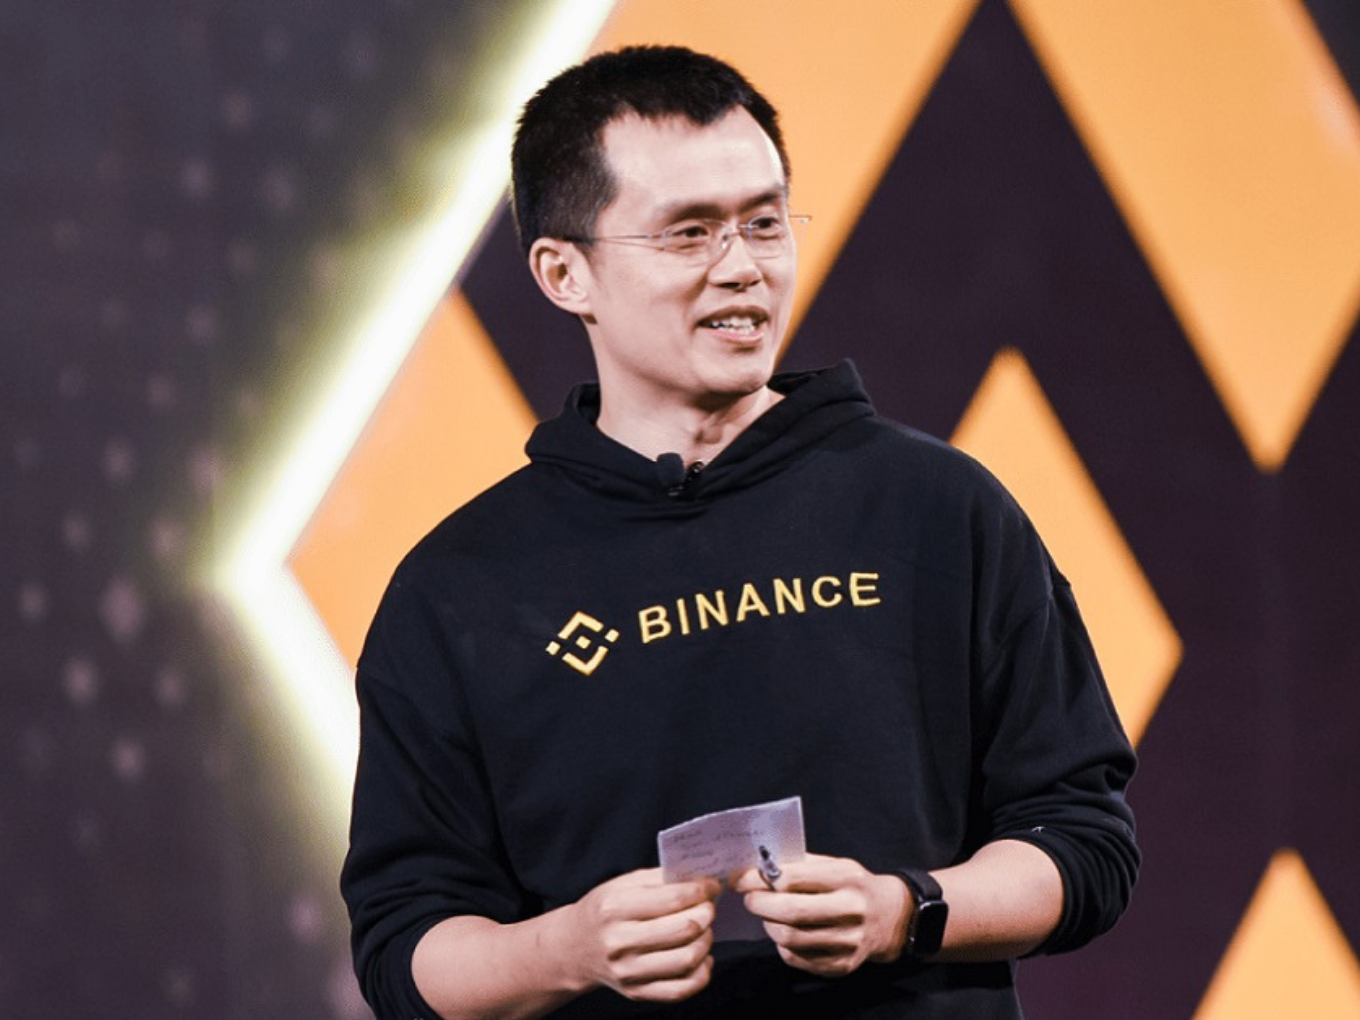 India Will Be A Natural Frontrunner For Web3 Startups: Binance CEO